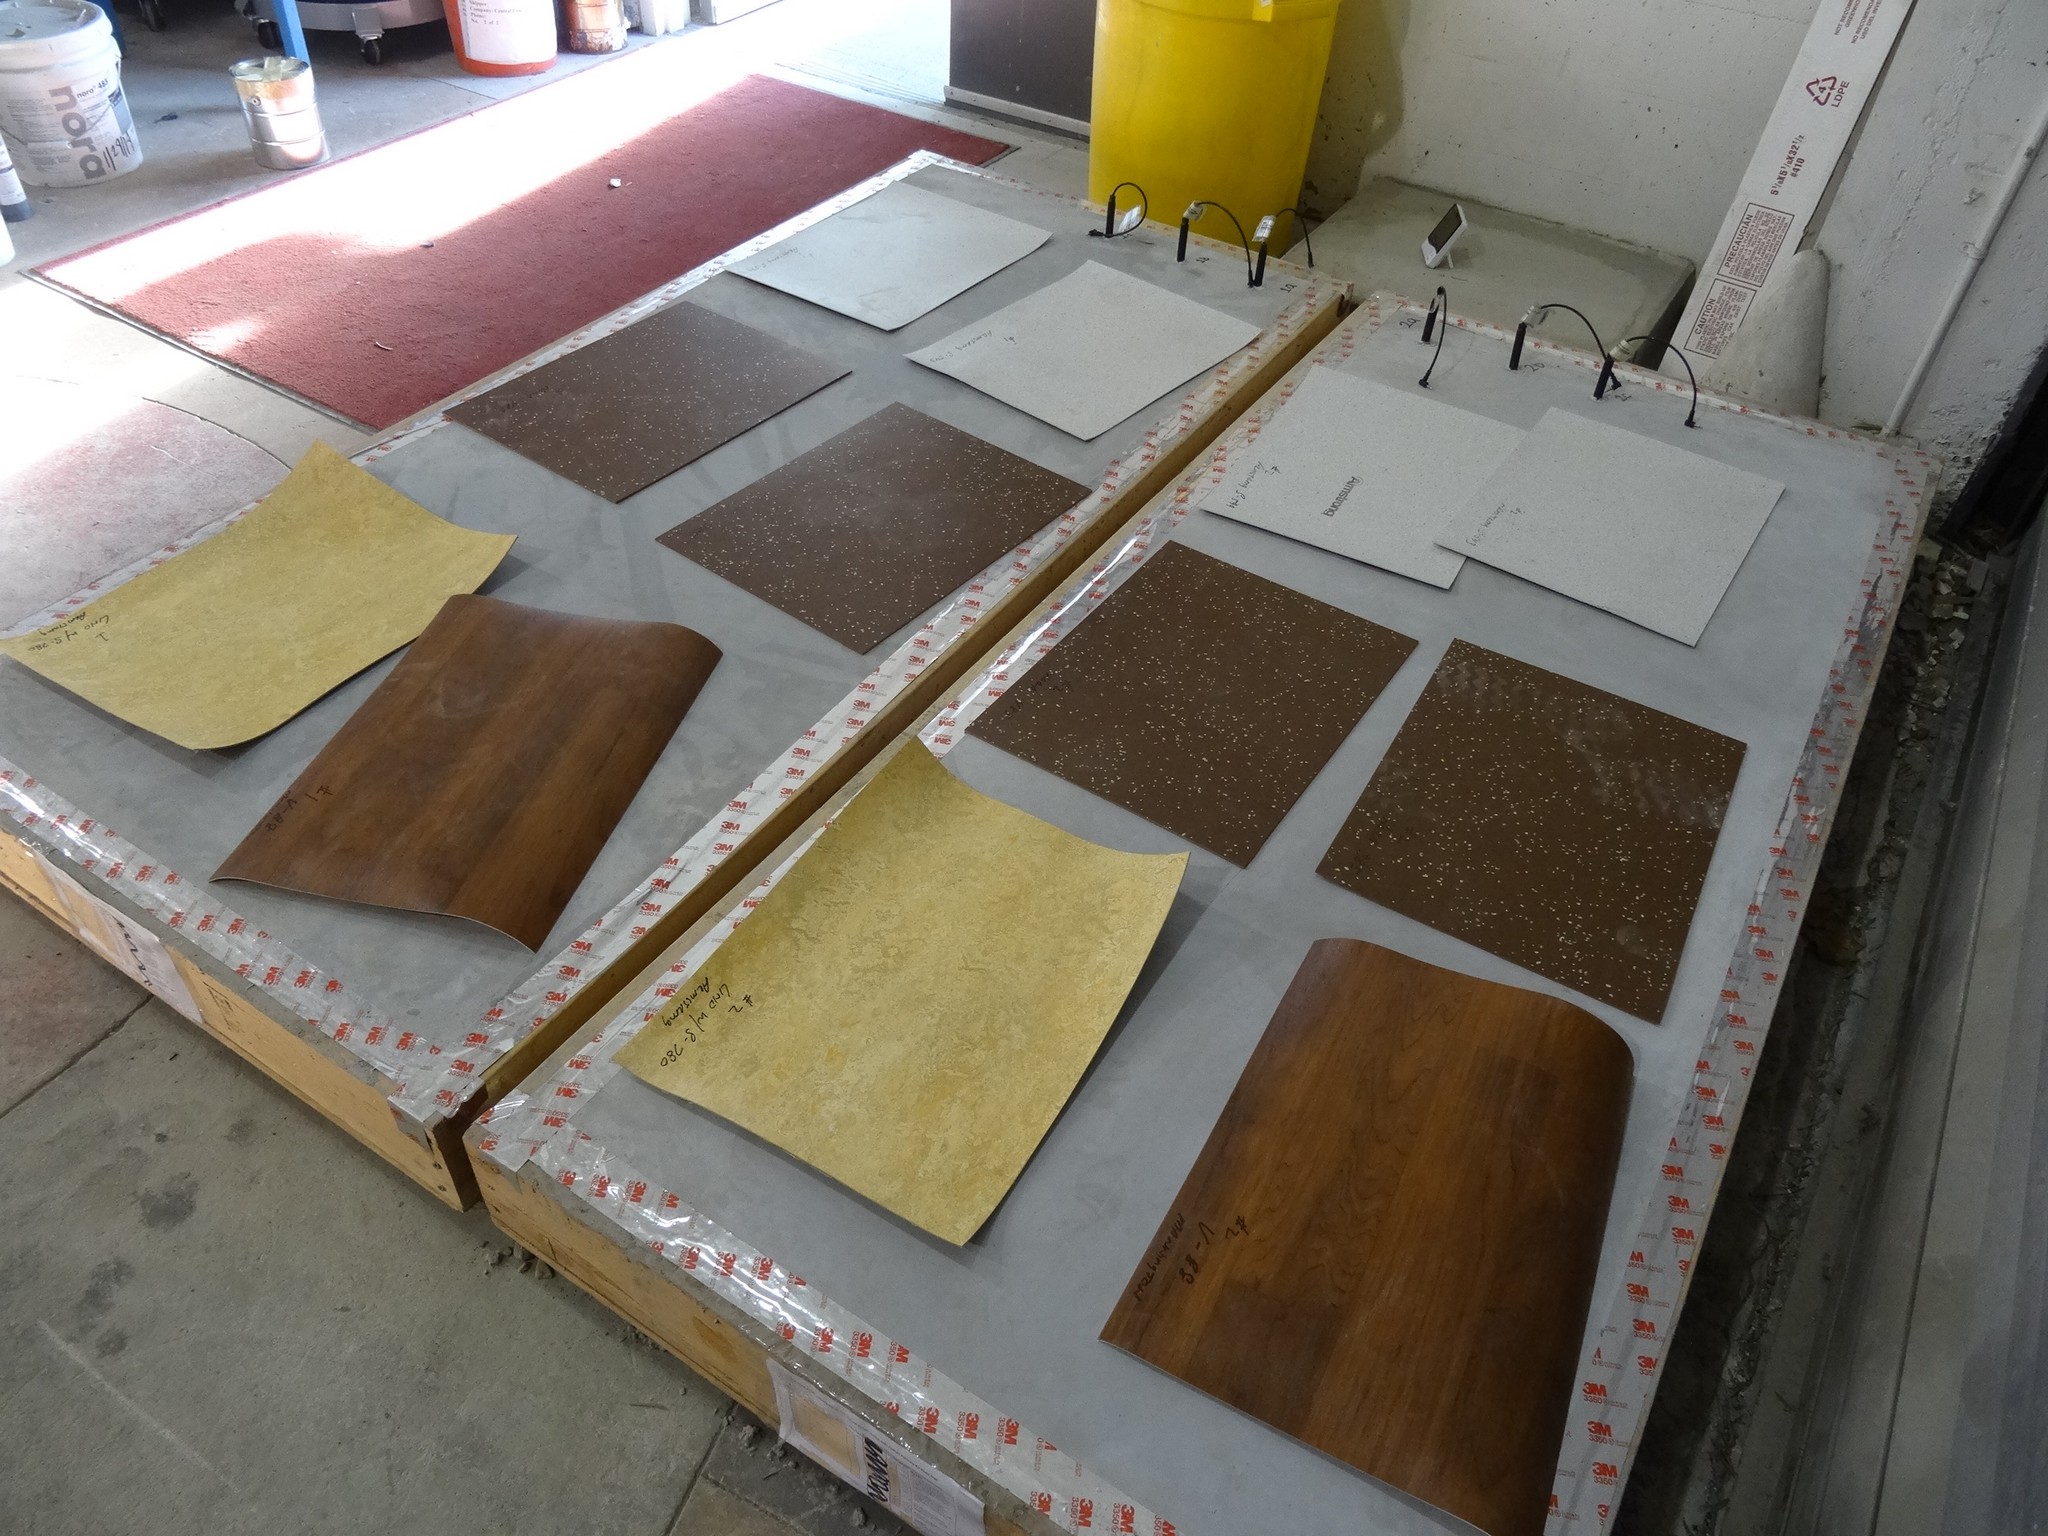 Concrete mix design testing for compatibility with different flooring/adhesive types